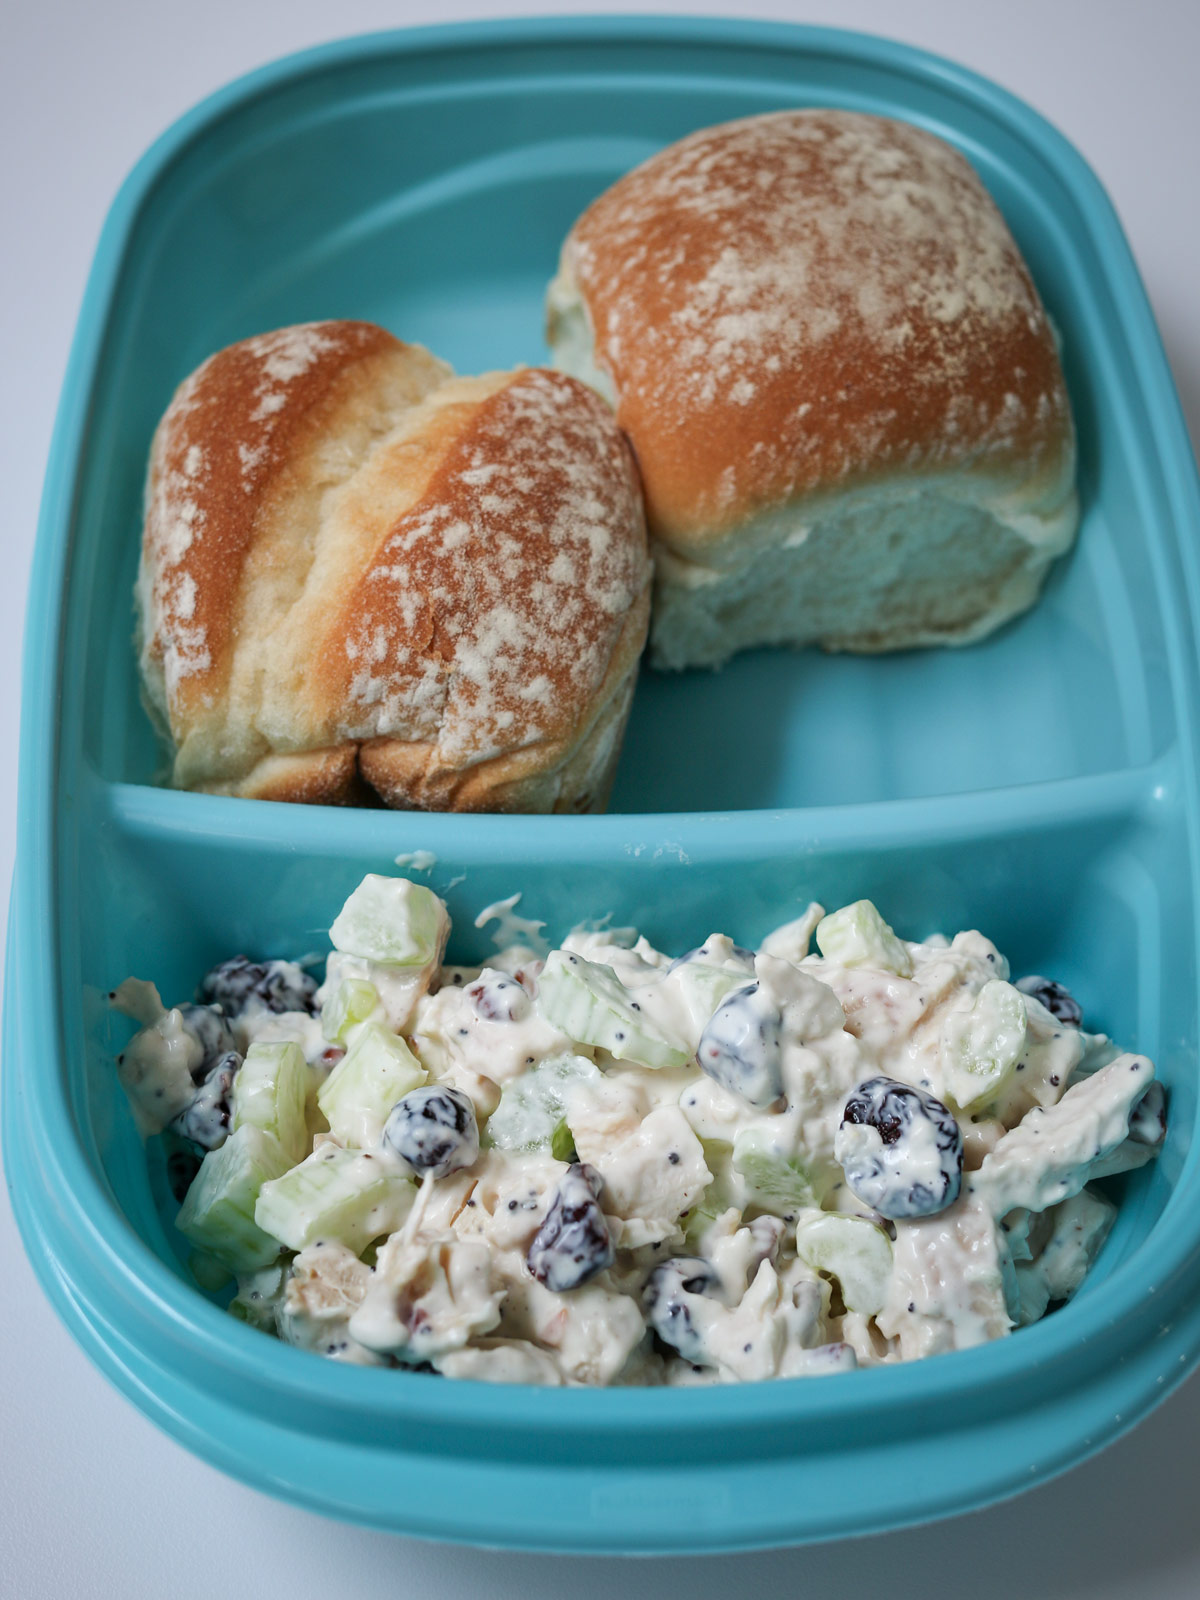 chicken salad in meal prep box with two rolls.